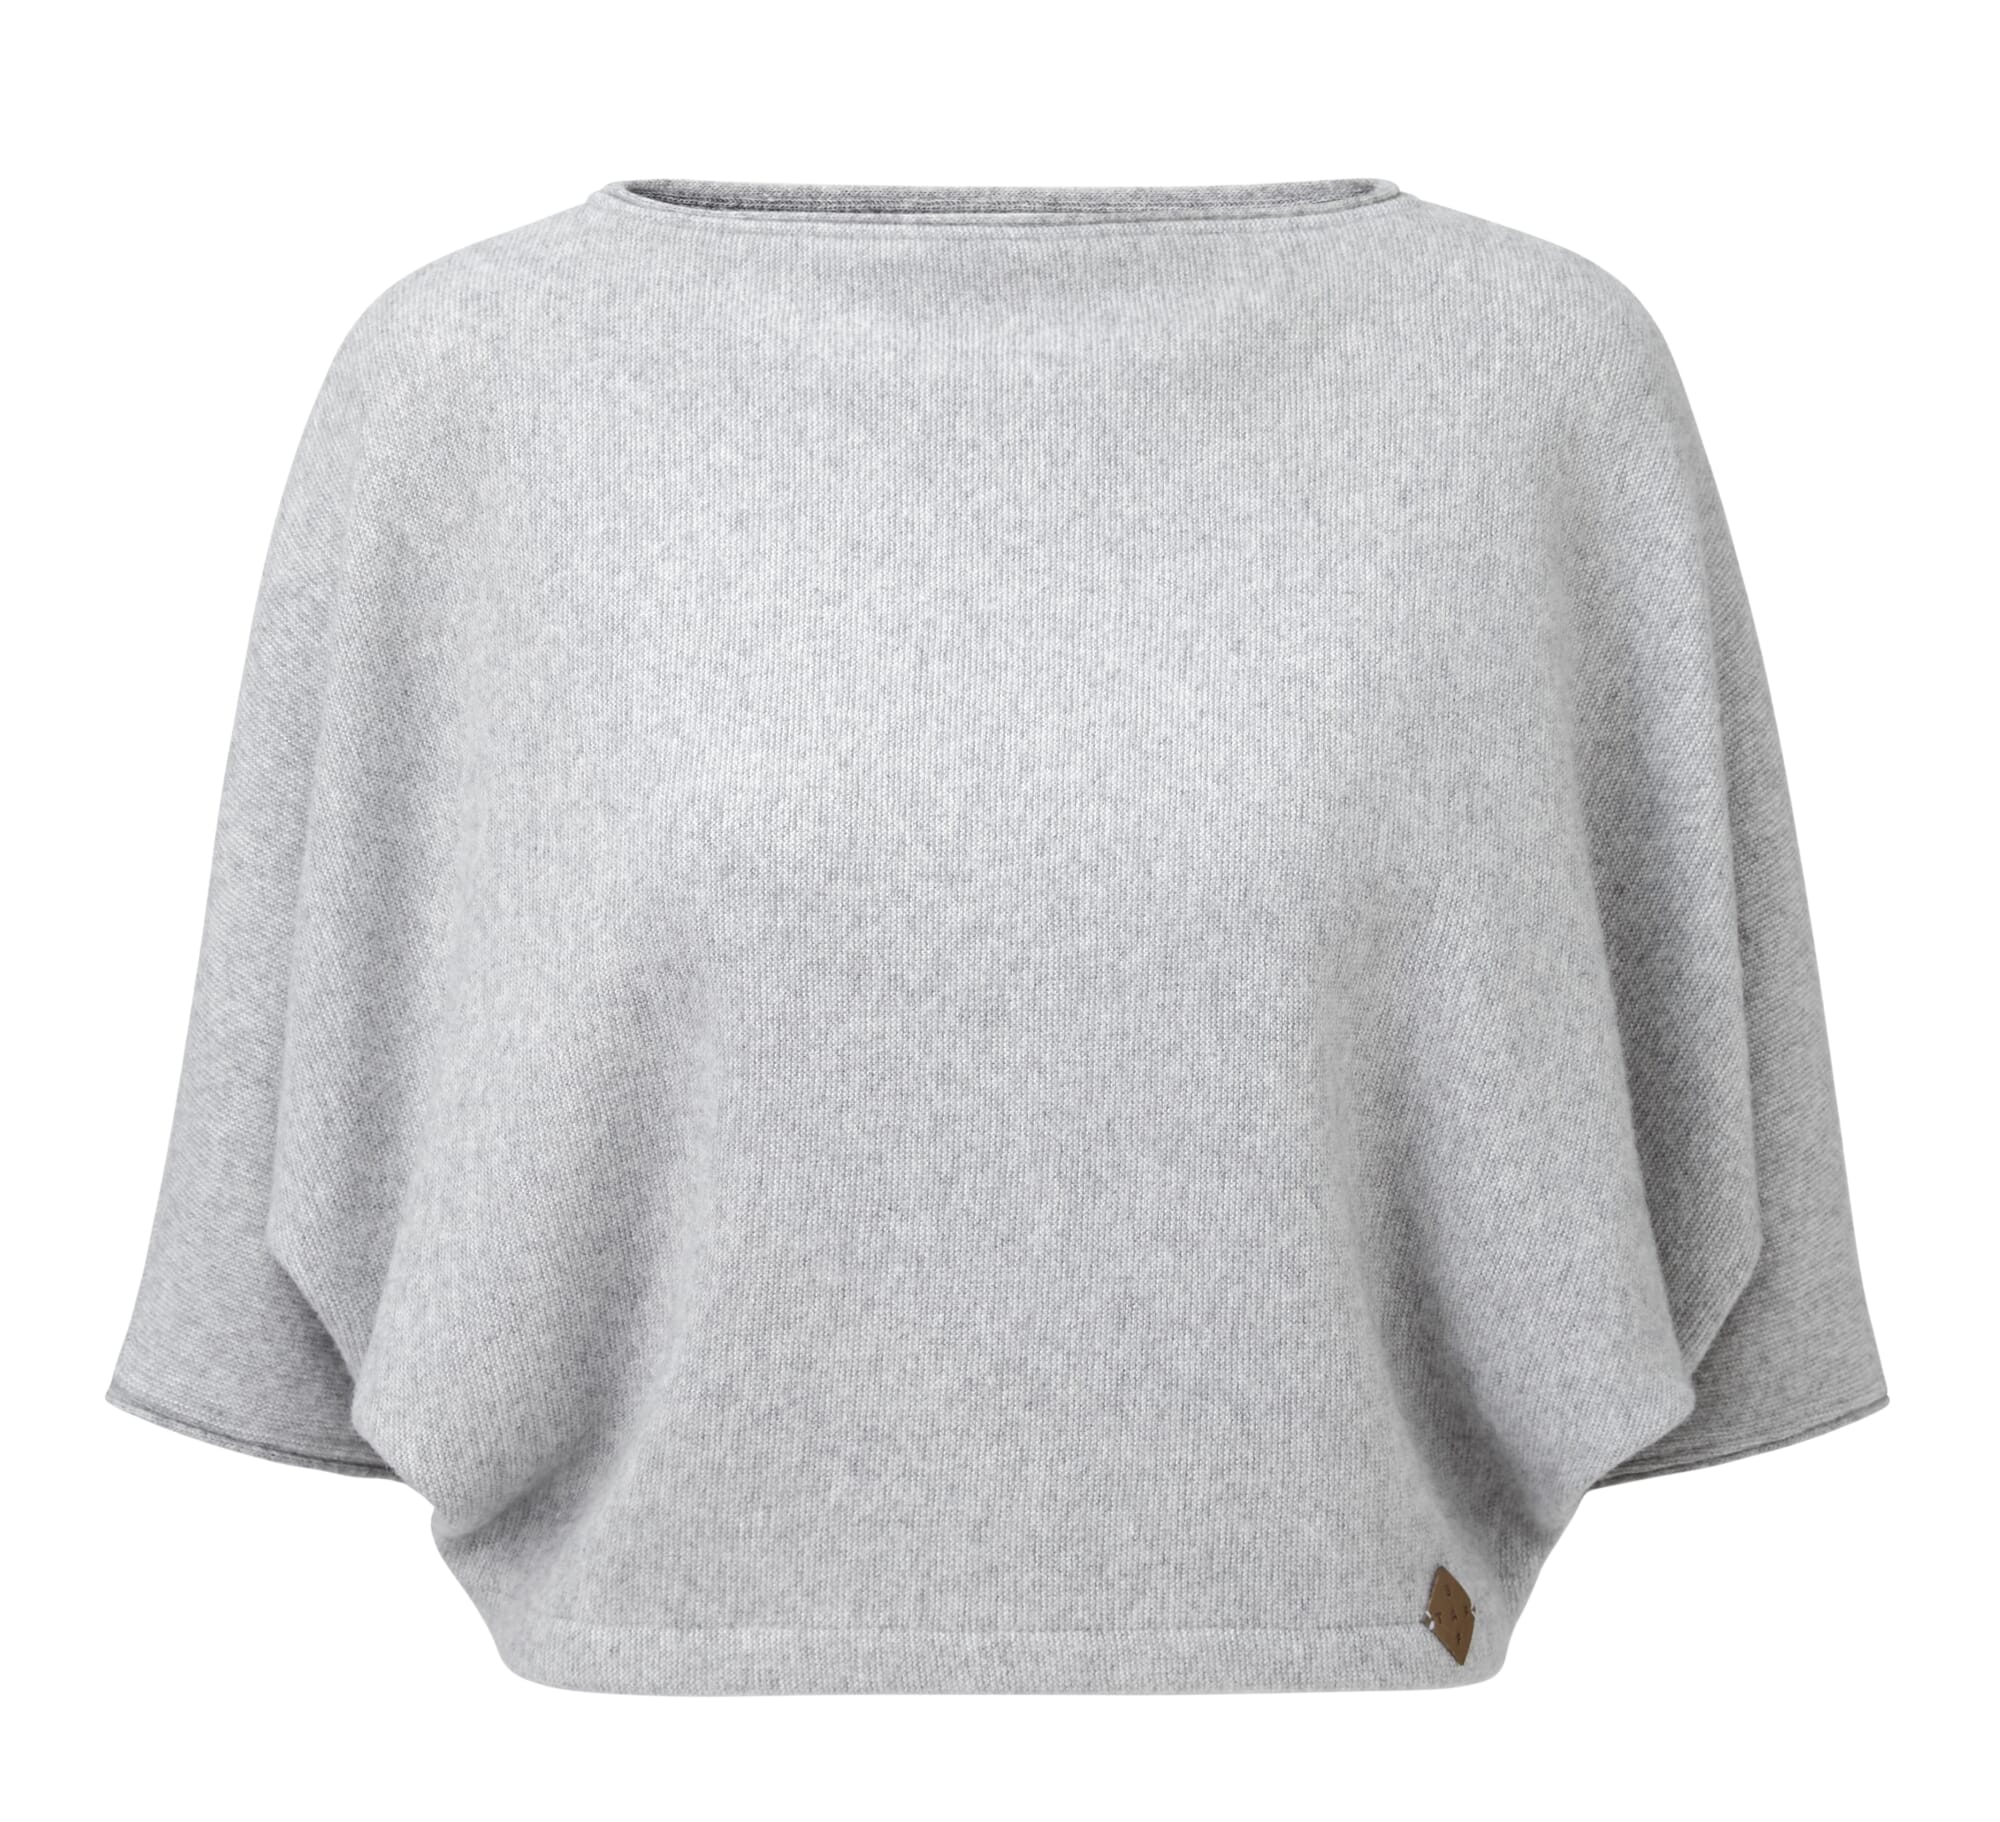 Ladies cropped sweater, Light gray